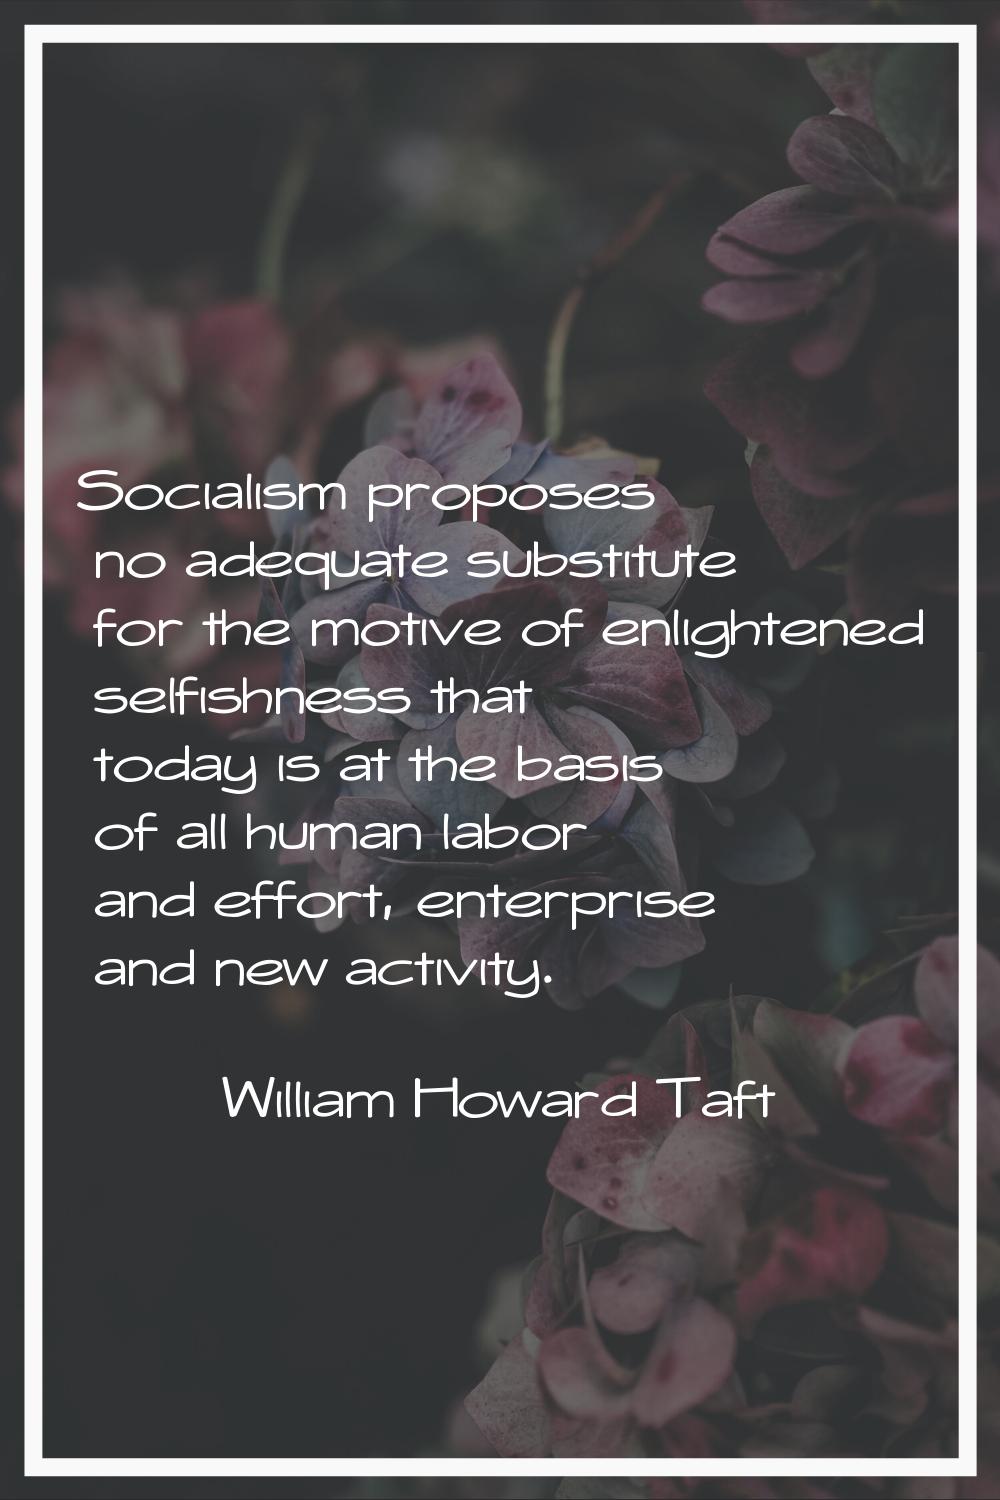 Socialism proposes no adequate substitute for the motive of enlightened selfishness that today is a